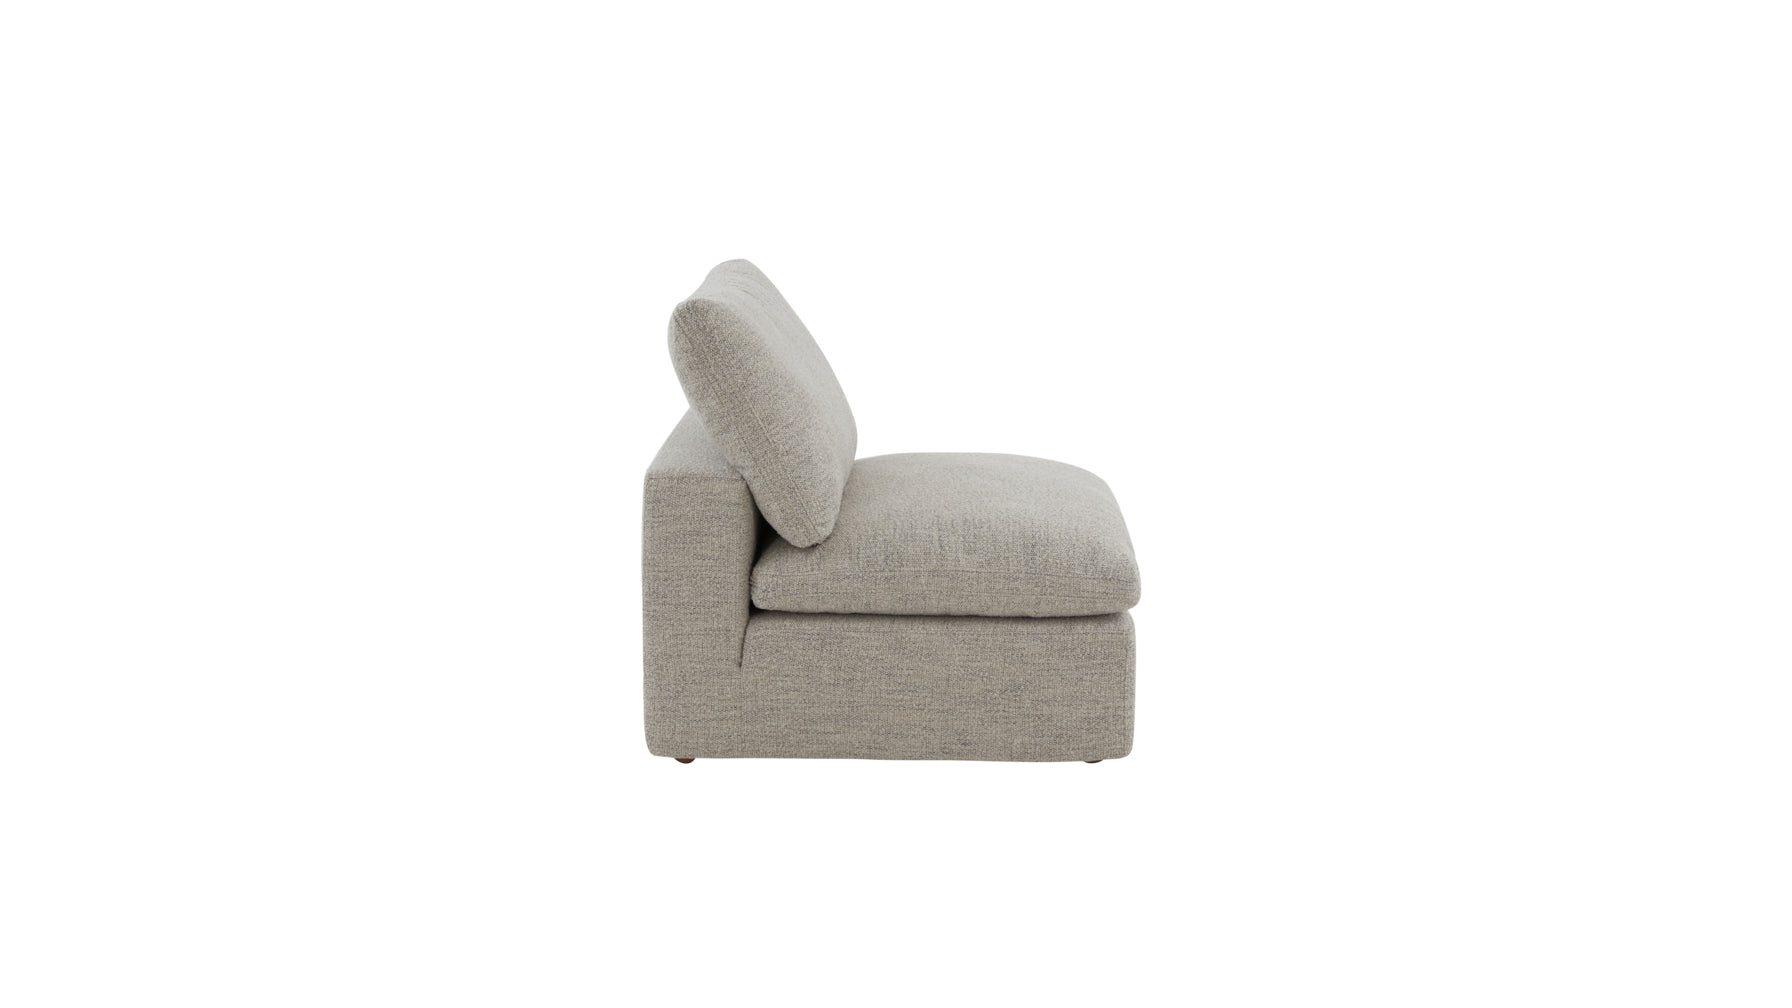 Movie Night™ Armless Chair, Large, Oatmeal - Image 7